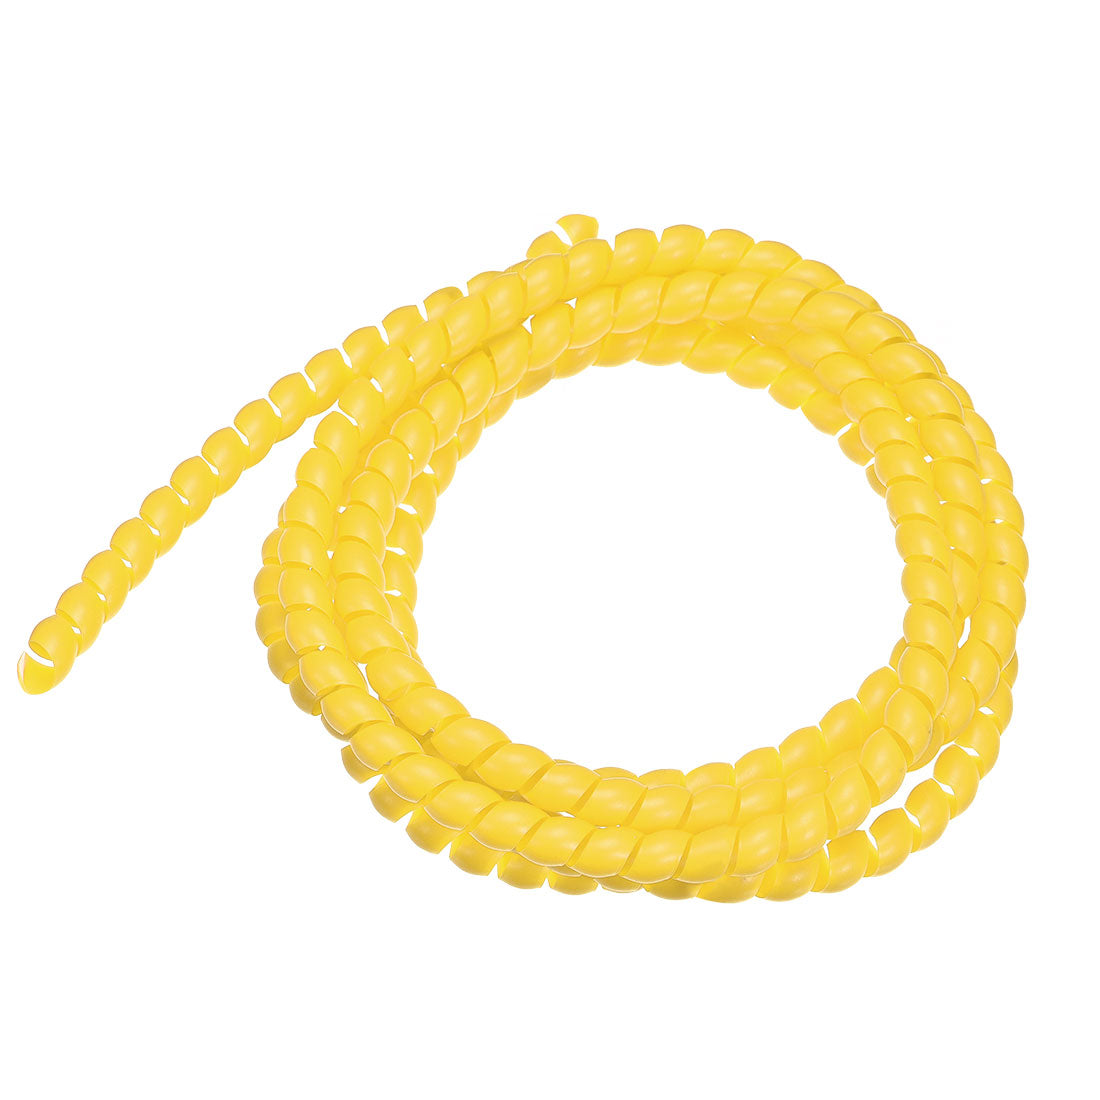 uxcell Uxcell Flexible Spiral Tube Wrap Cable Management Sleeve 8mm x 10mm Computer Wire Manage Cord 2 Meters Length Yellow